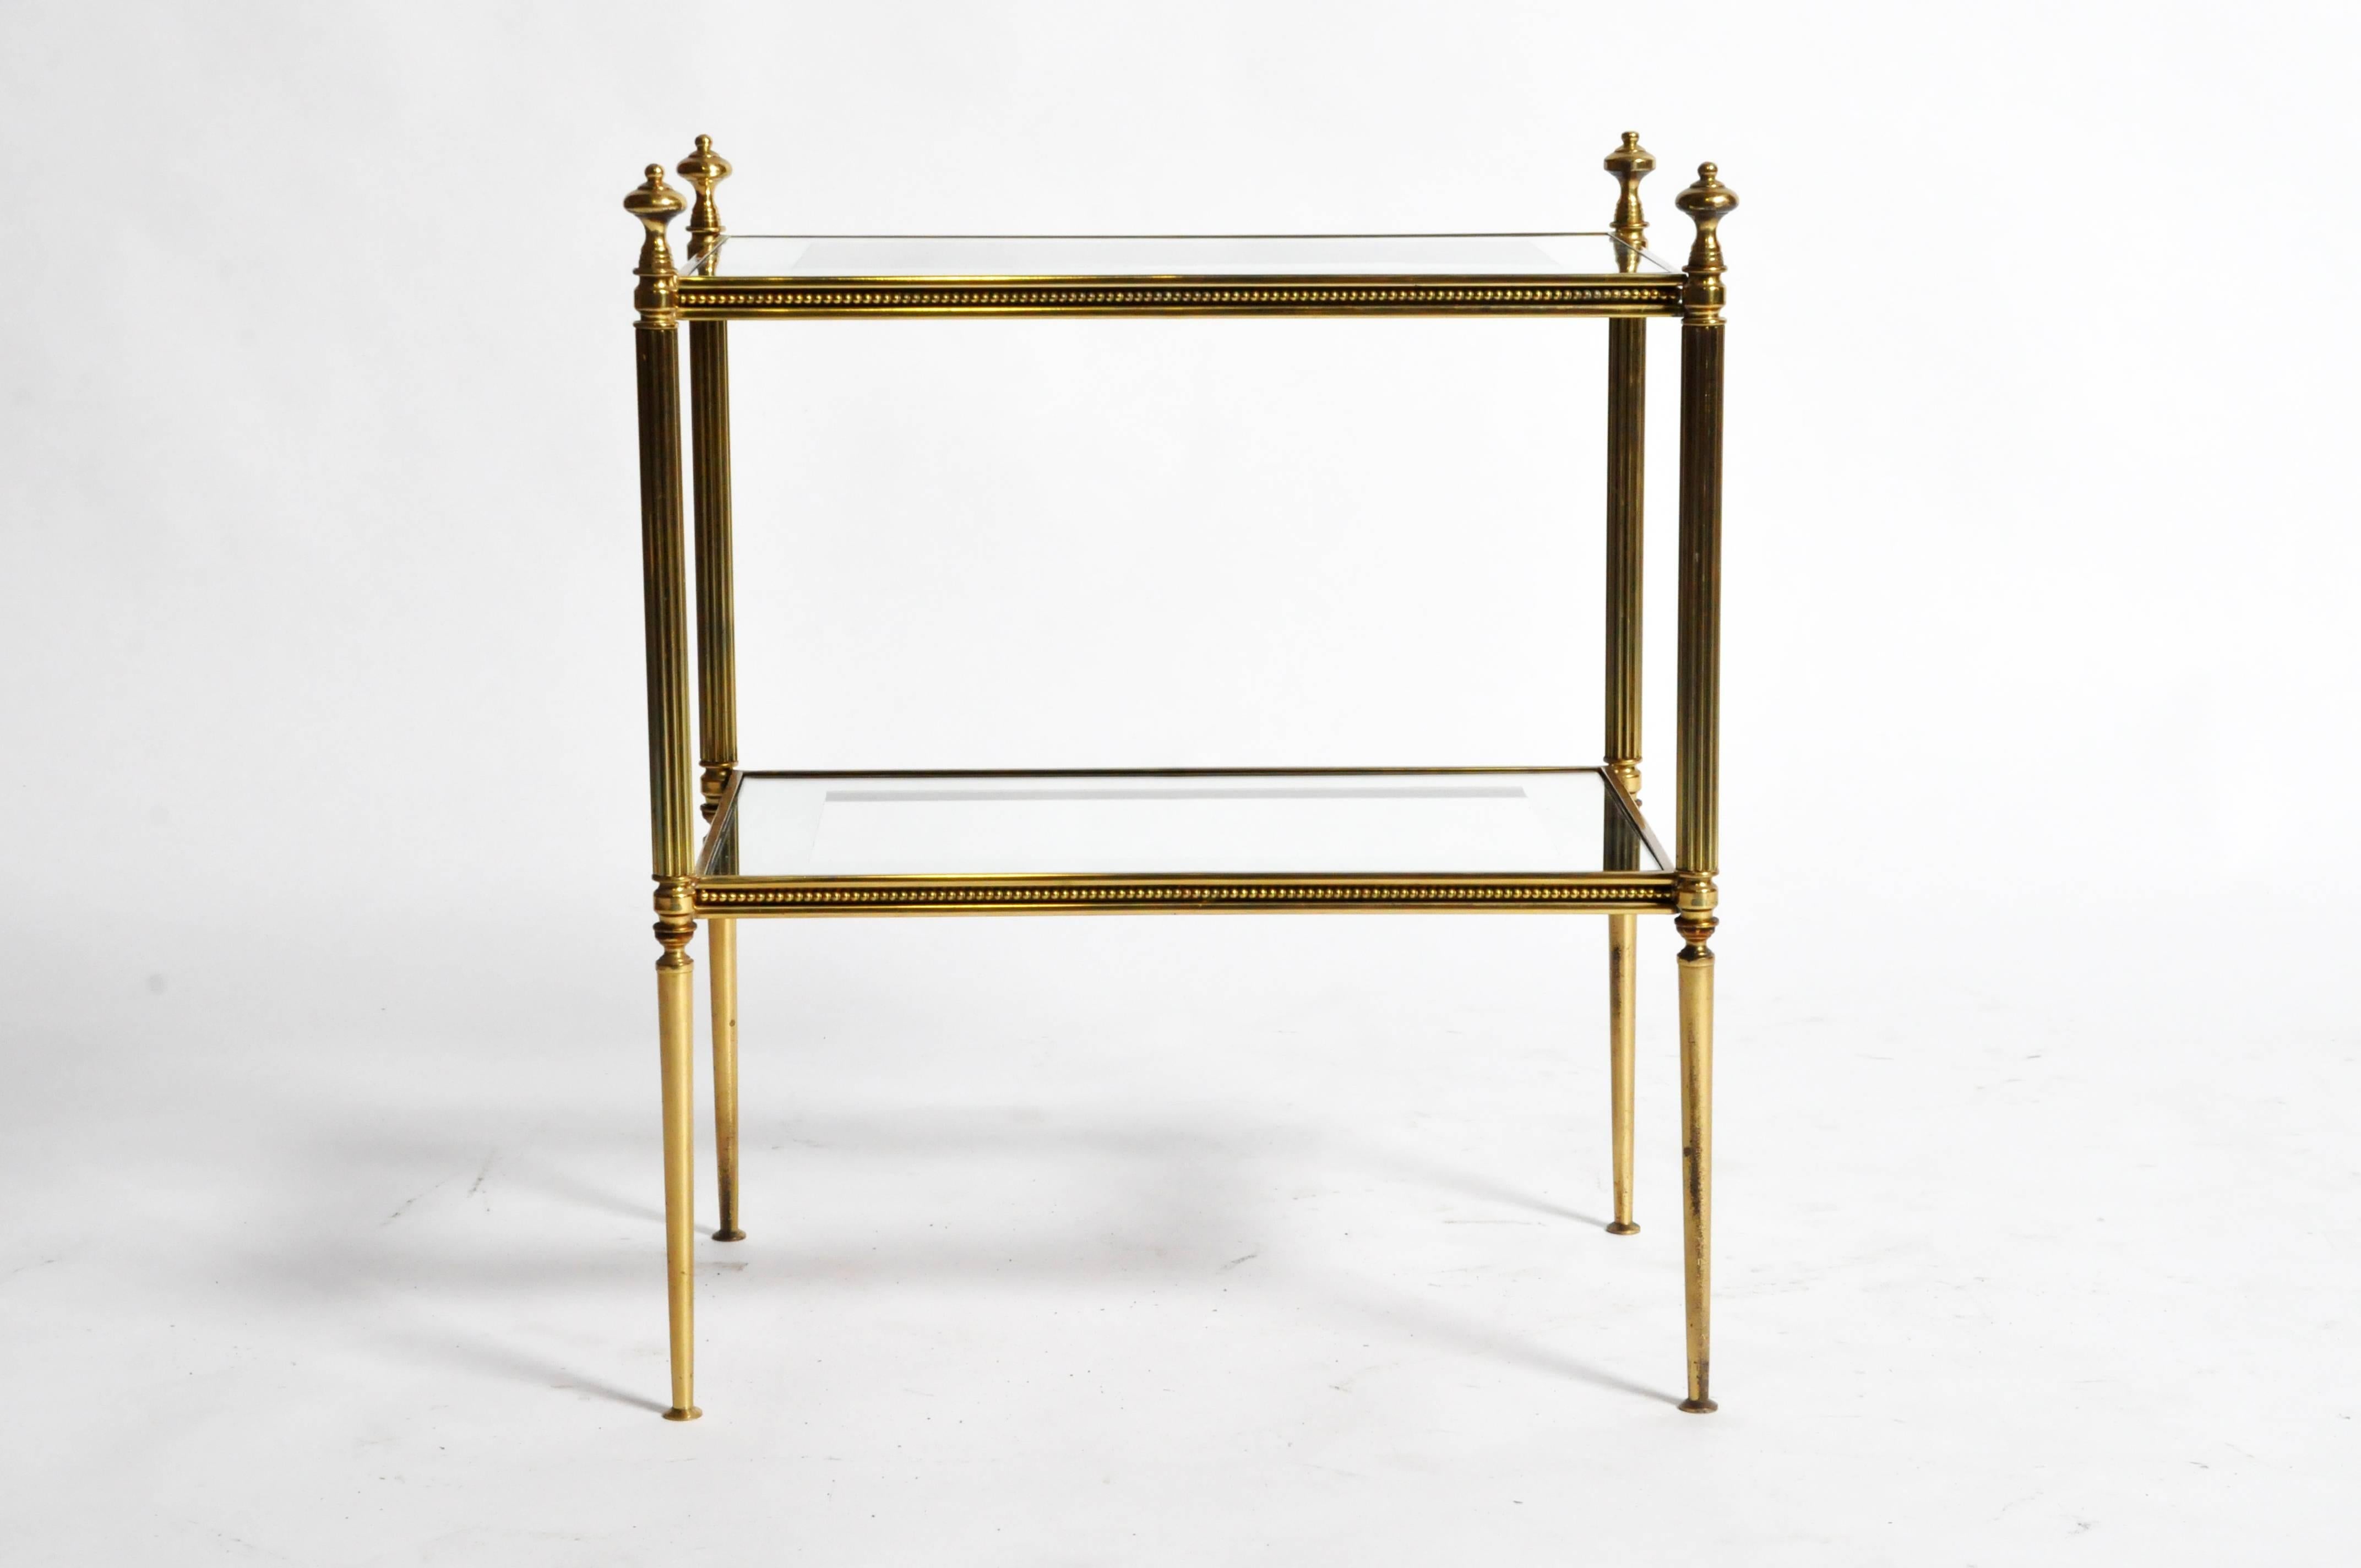 Brass Pair of French Mid-Century Modern Side Tables with Mirrored Glass Shelves